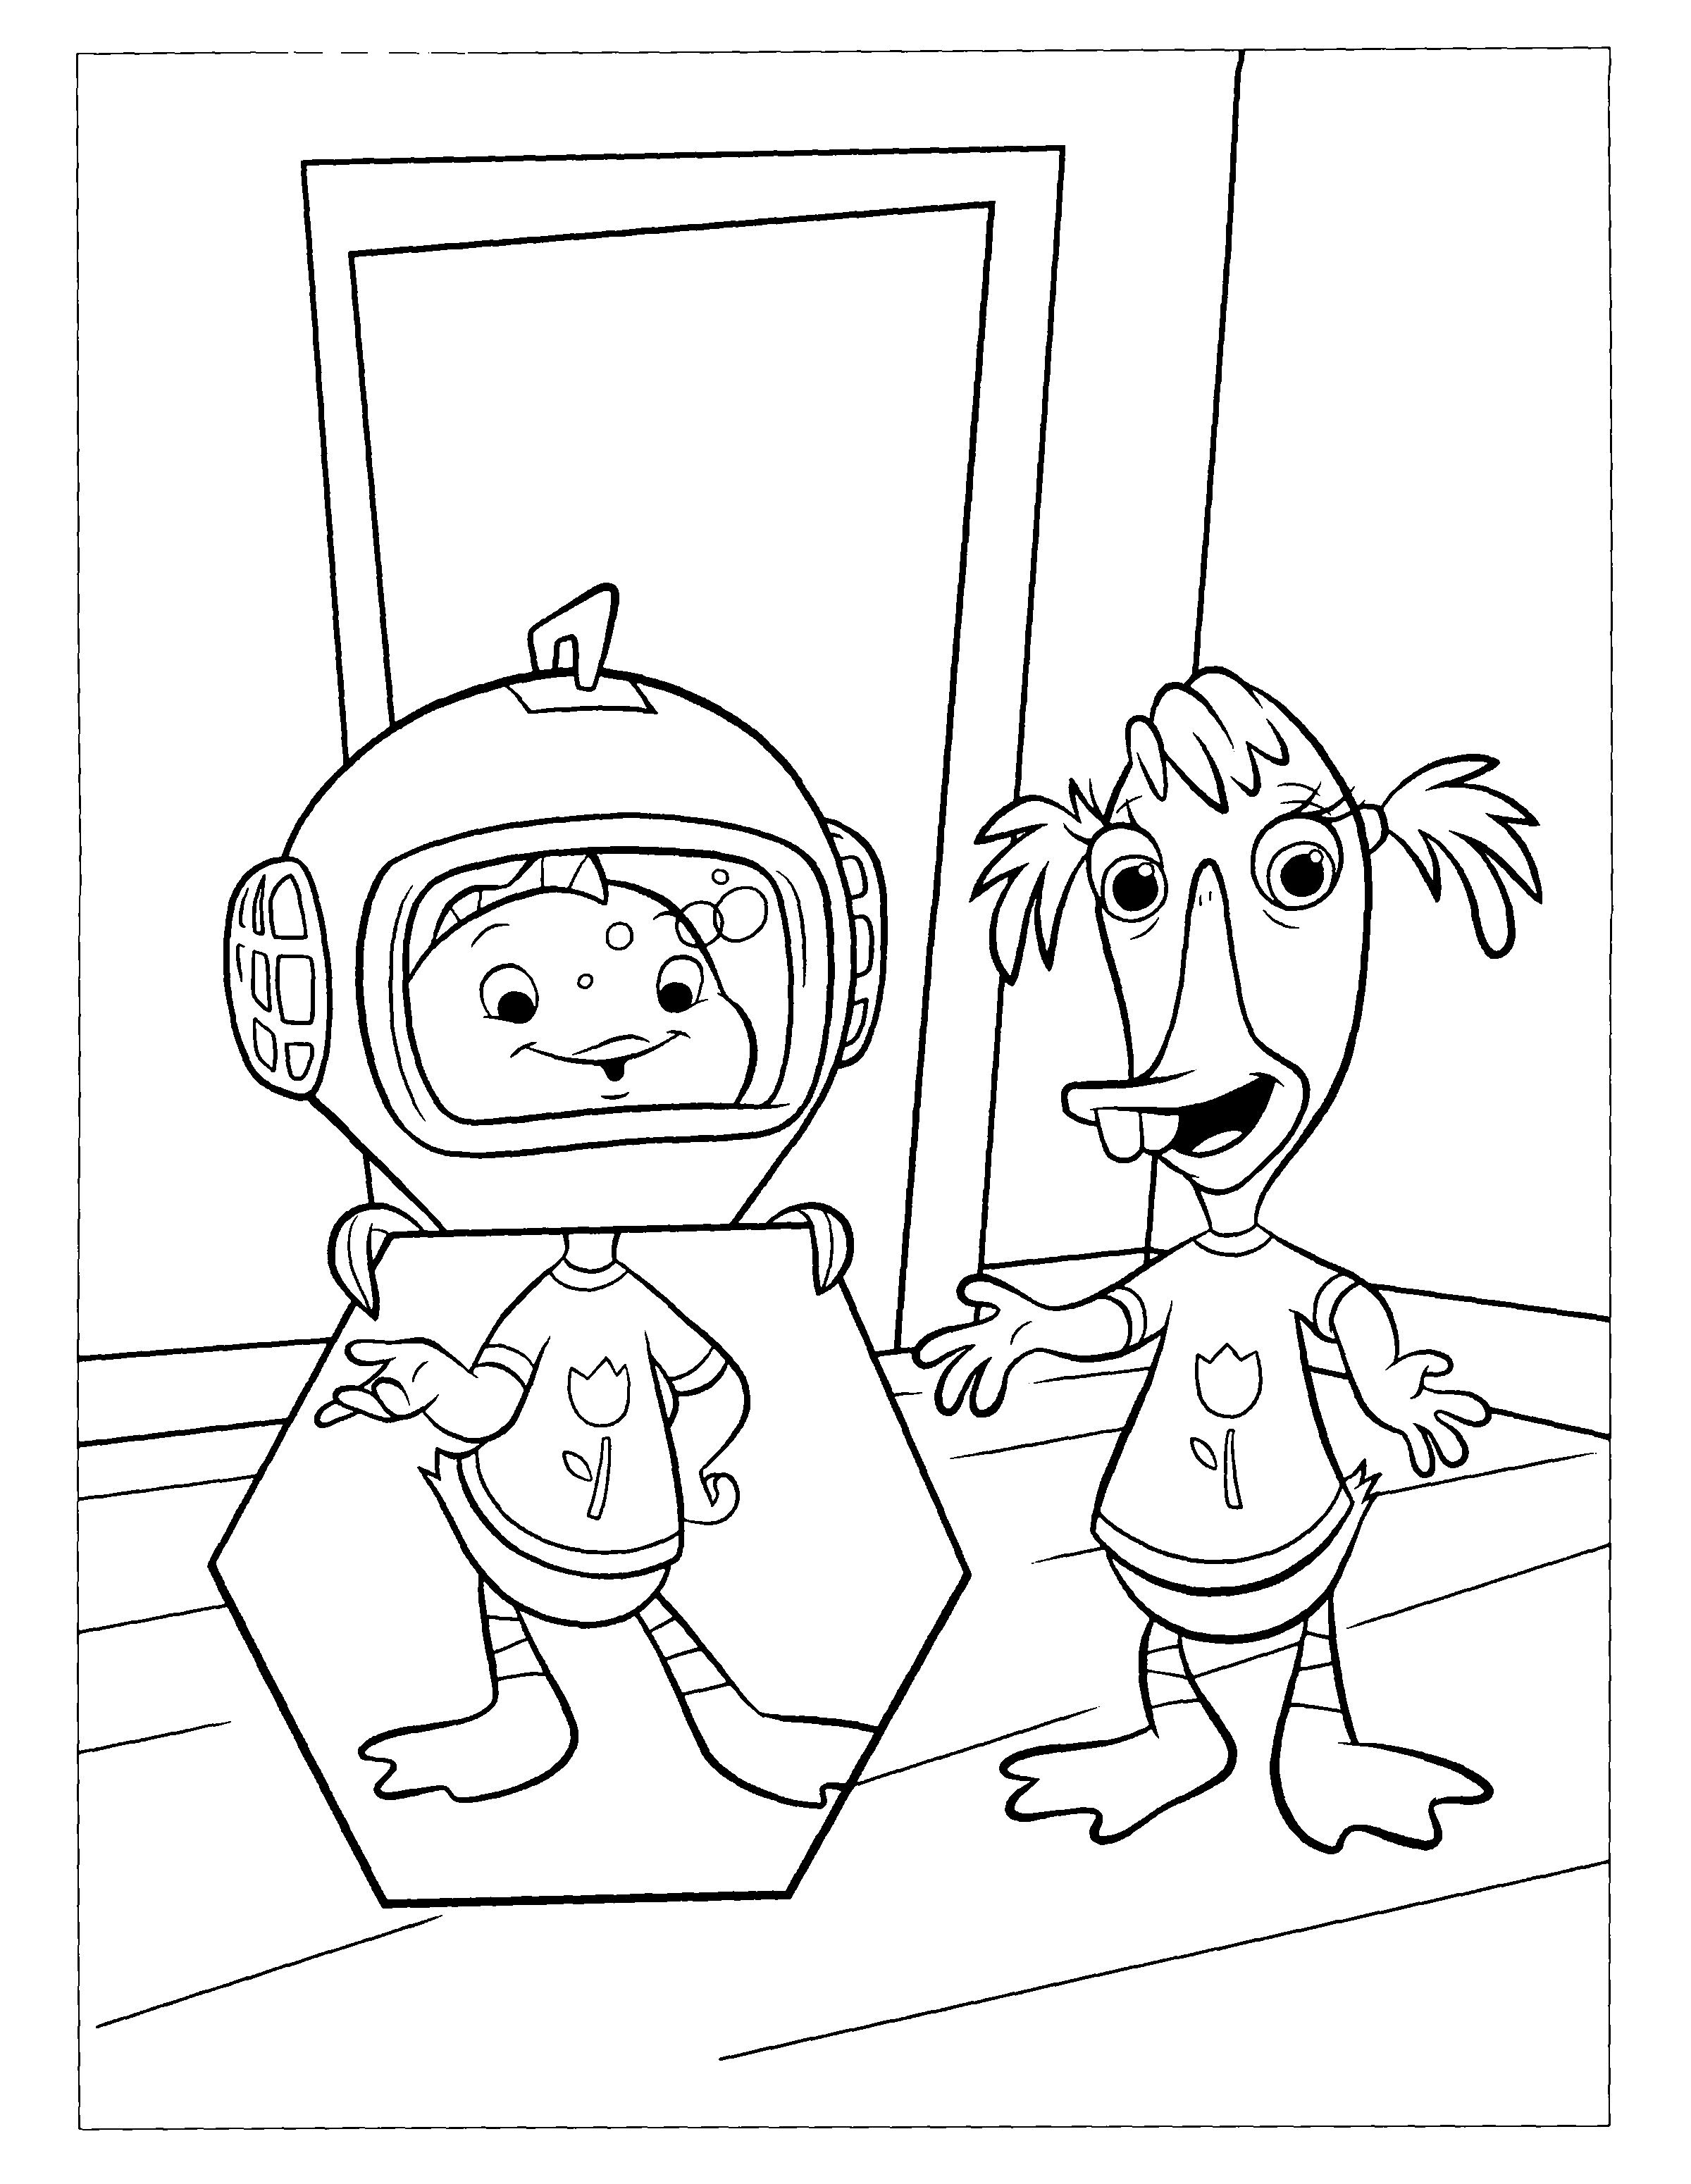 Chiken little Coloring Pages